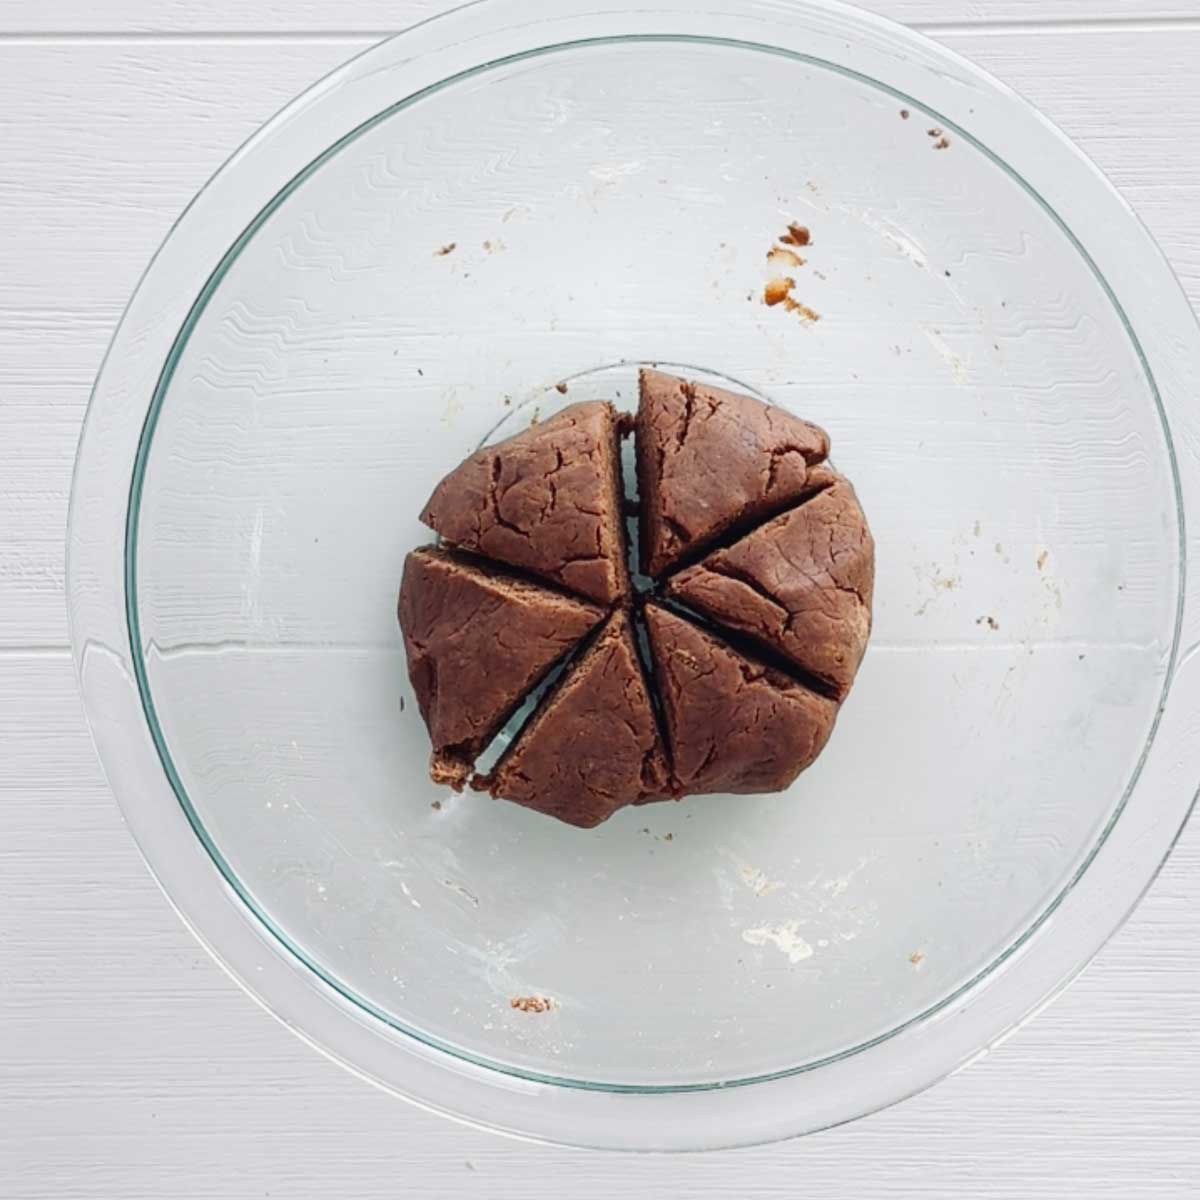 Healthier Nutella Chocolate Easter Eggs Made with PB Powder - Peanut Butter Scones